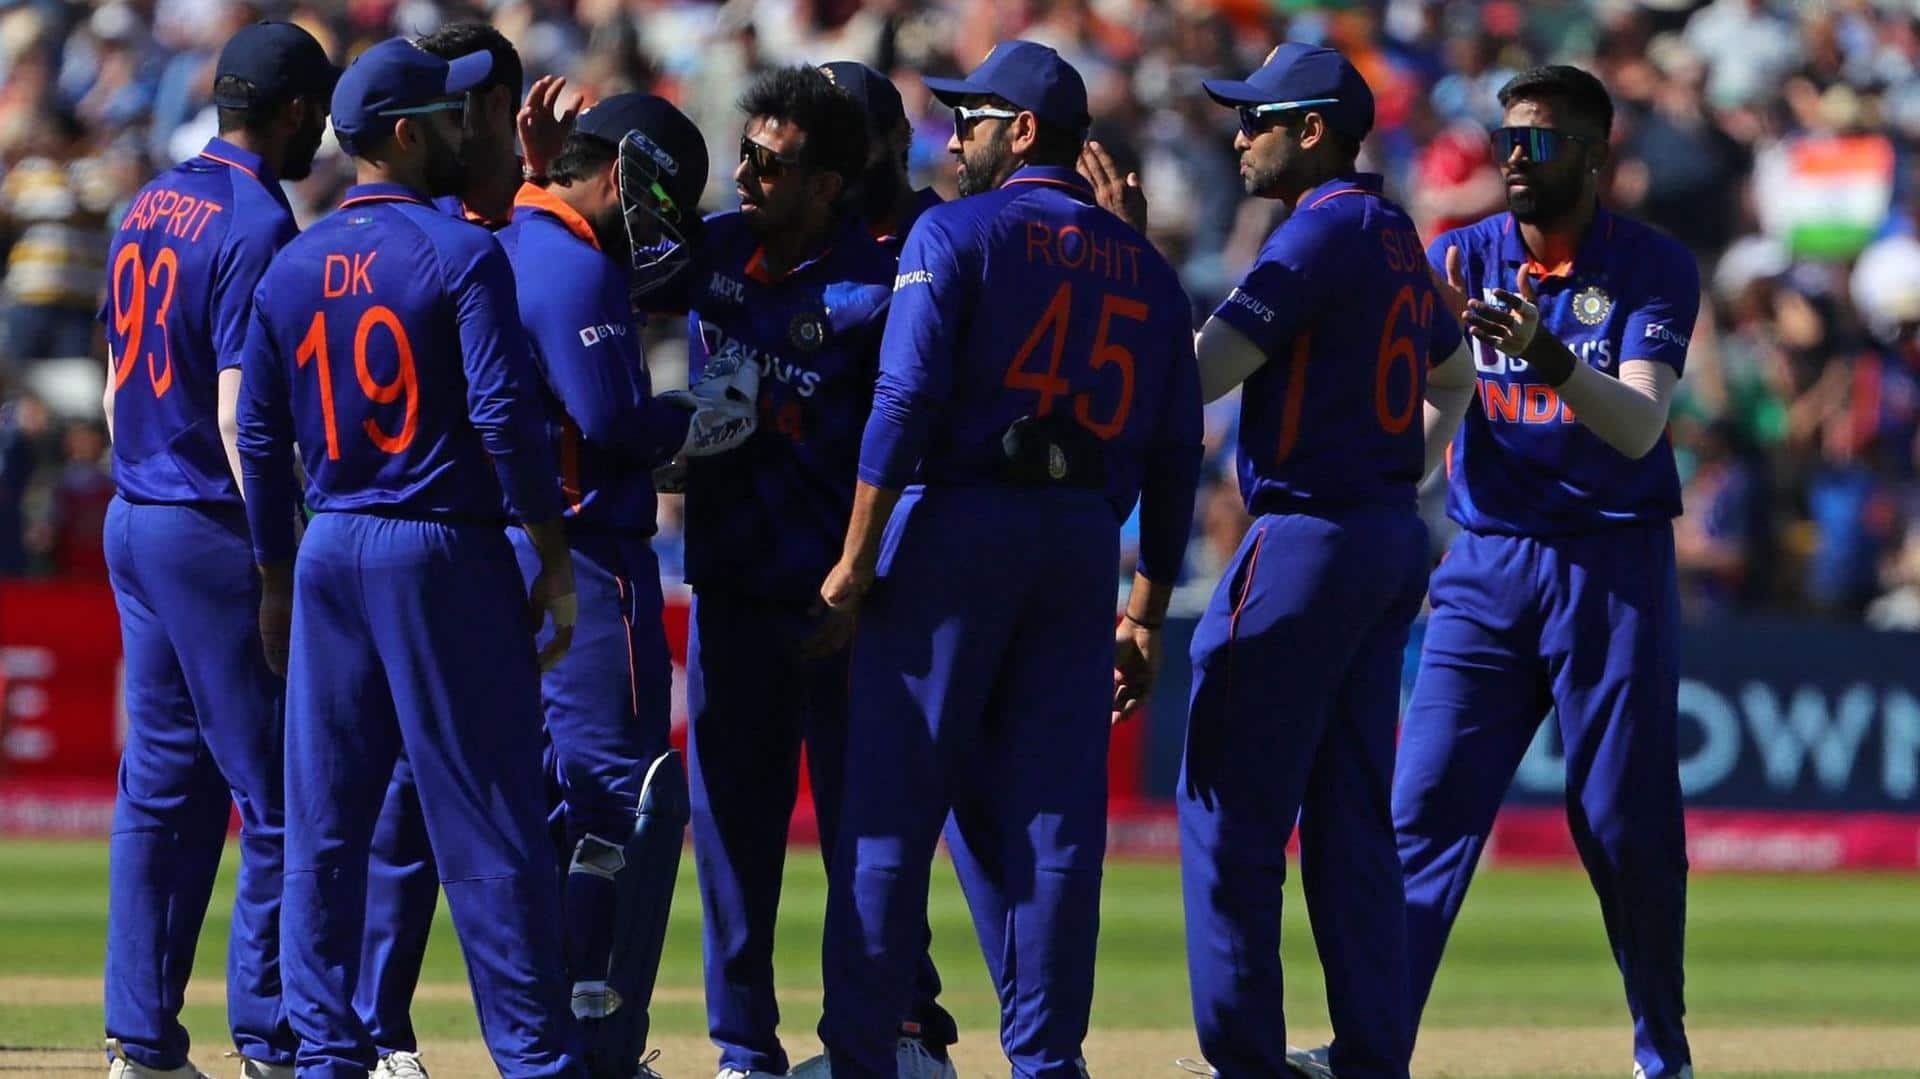 India vs England in ICC knockout matches: Key stats